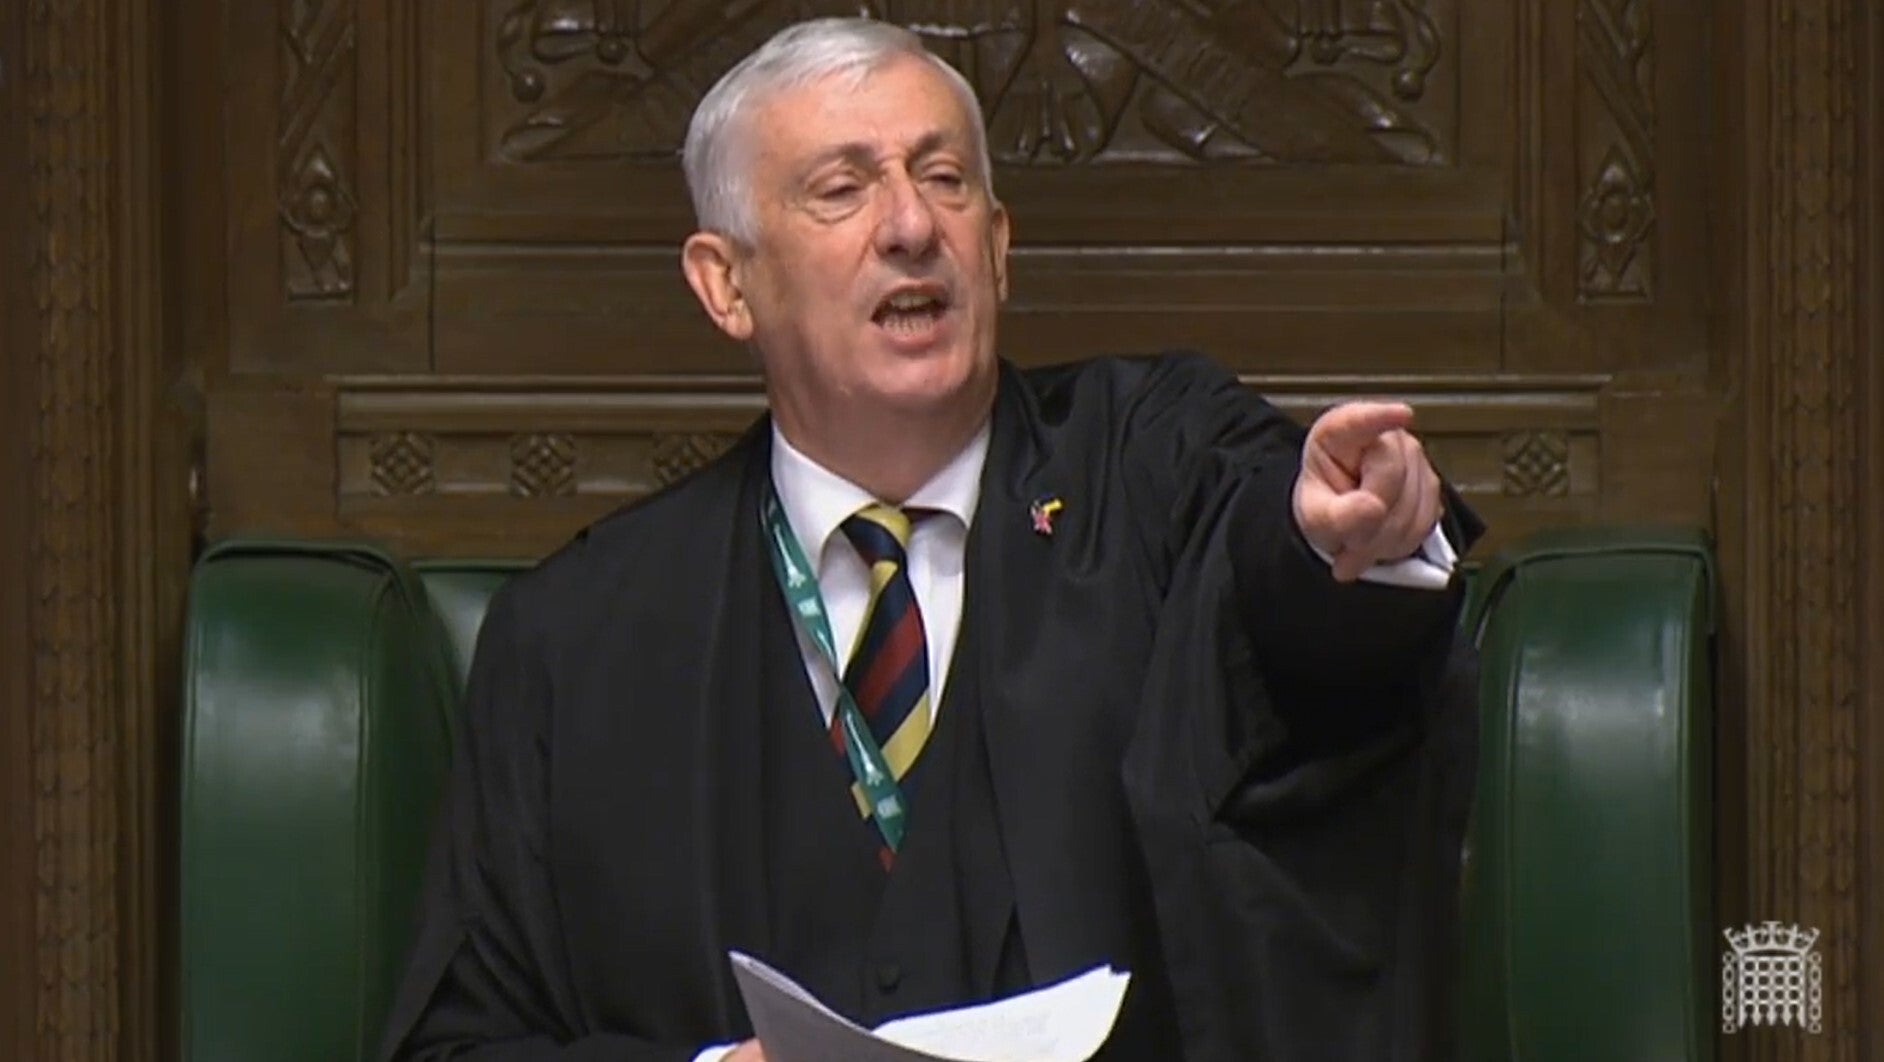 Speaker Sir Lindsay Hoyle throws out Alba MPs Kenny MacAskill and Neale Hanvey at the start of Prime Minister’s Questions (House of Commons/PA)